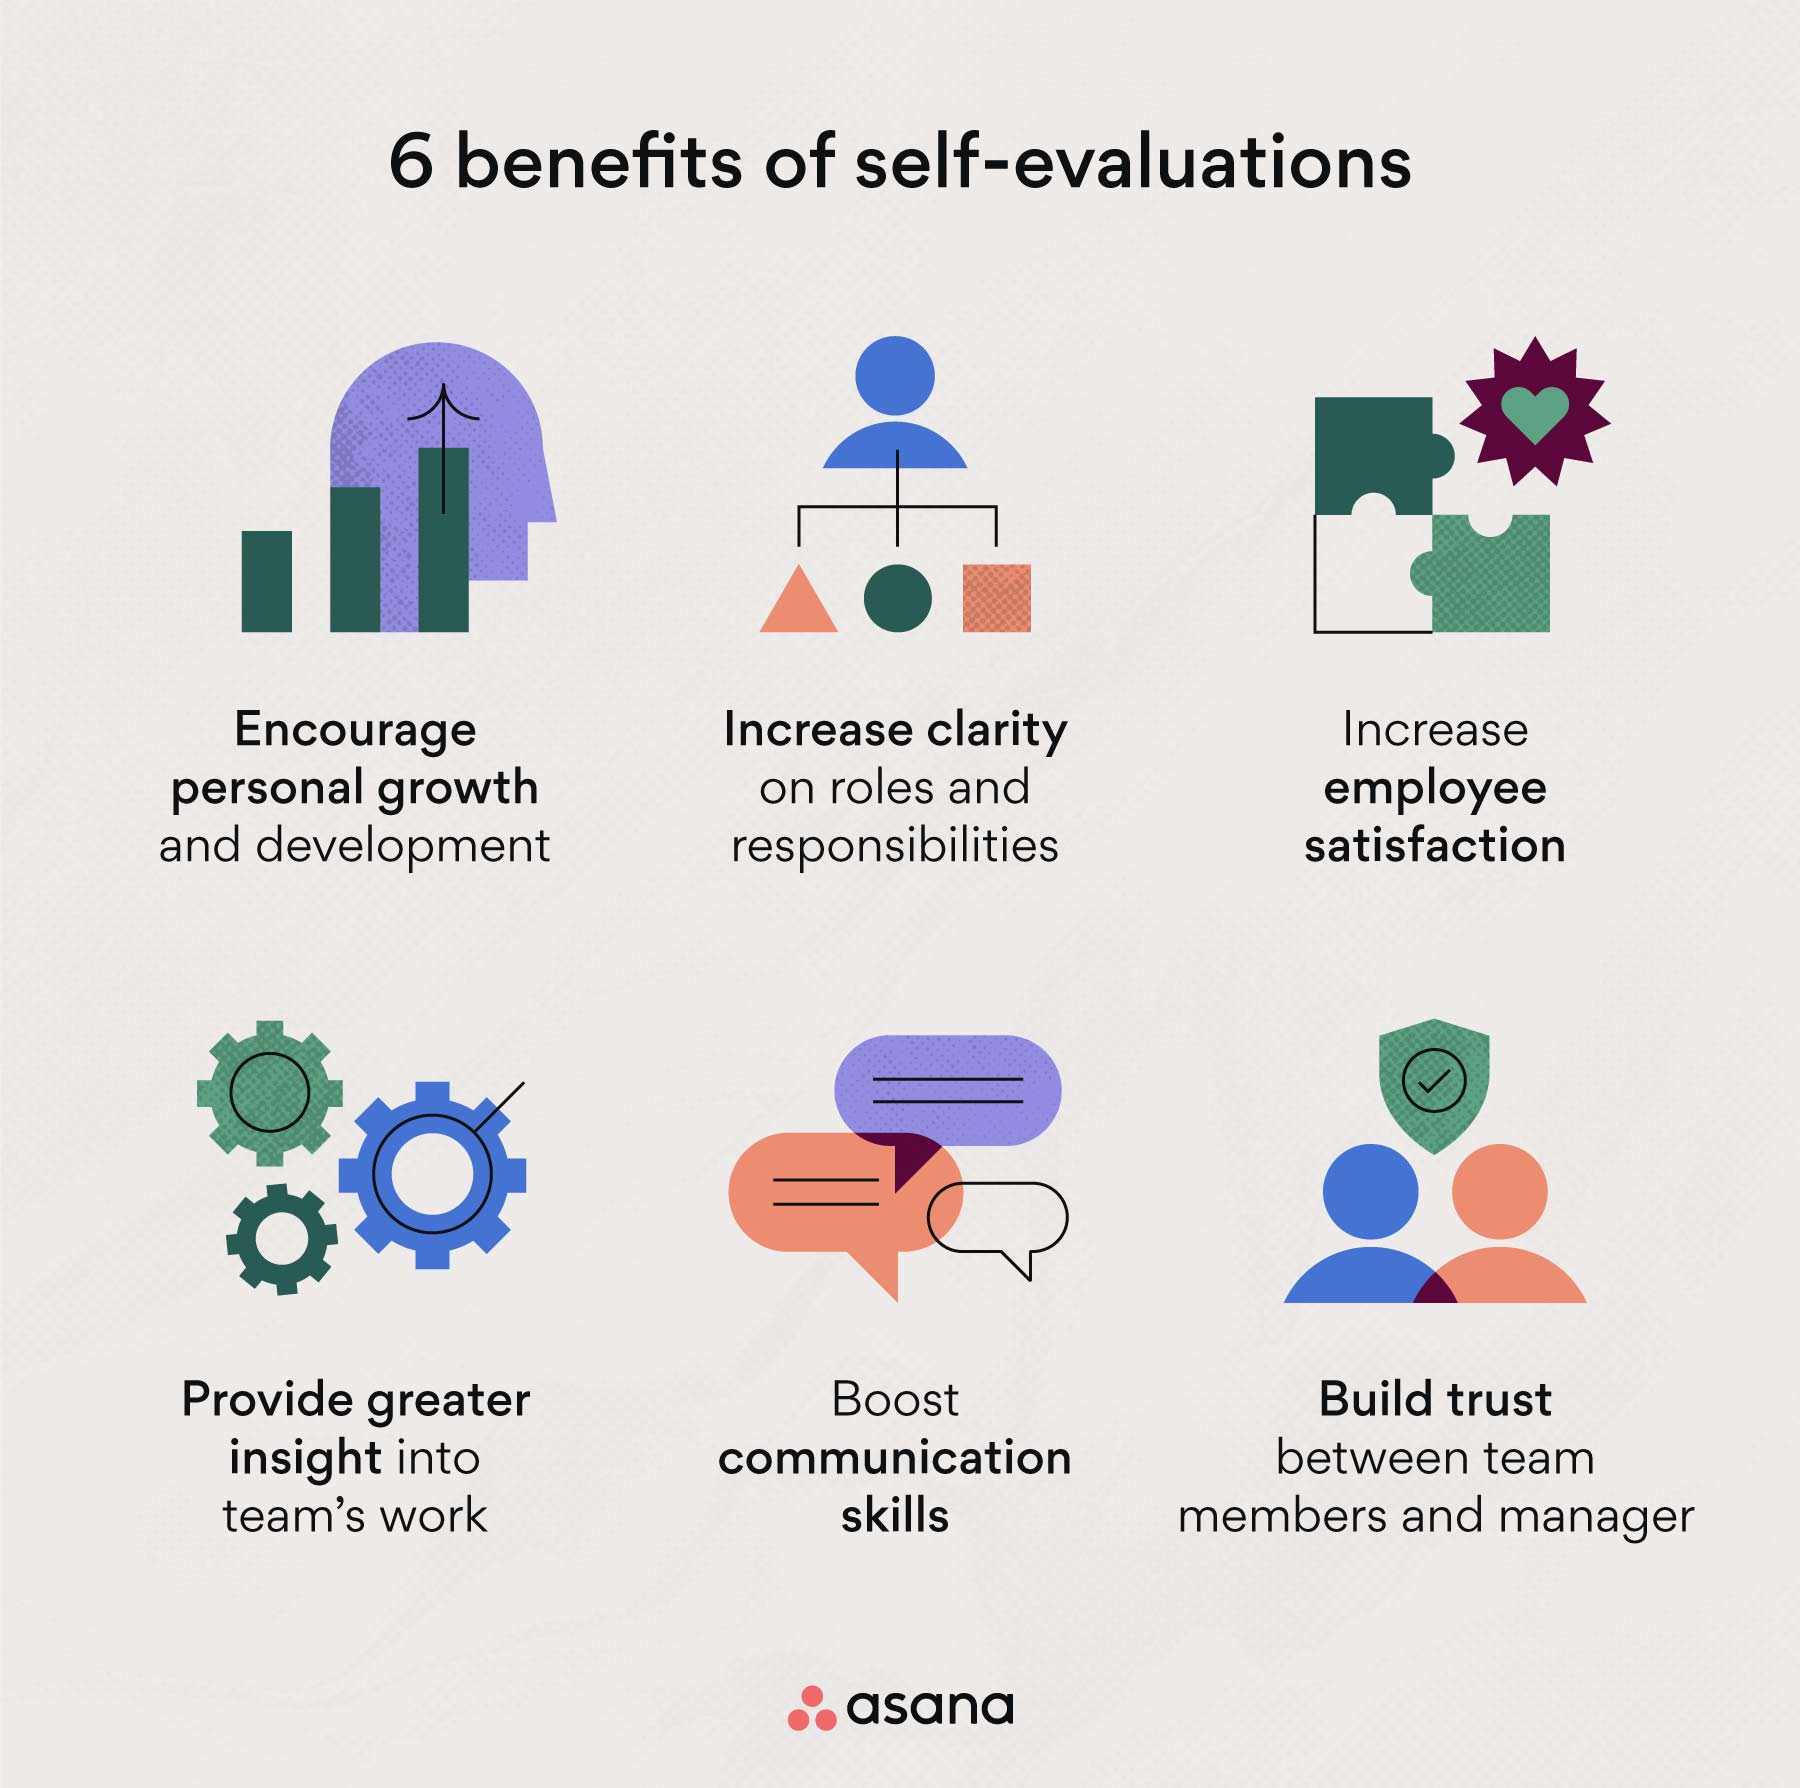 6 benefits of self-evaluations